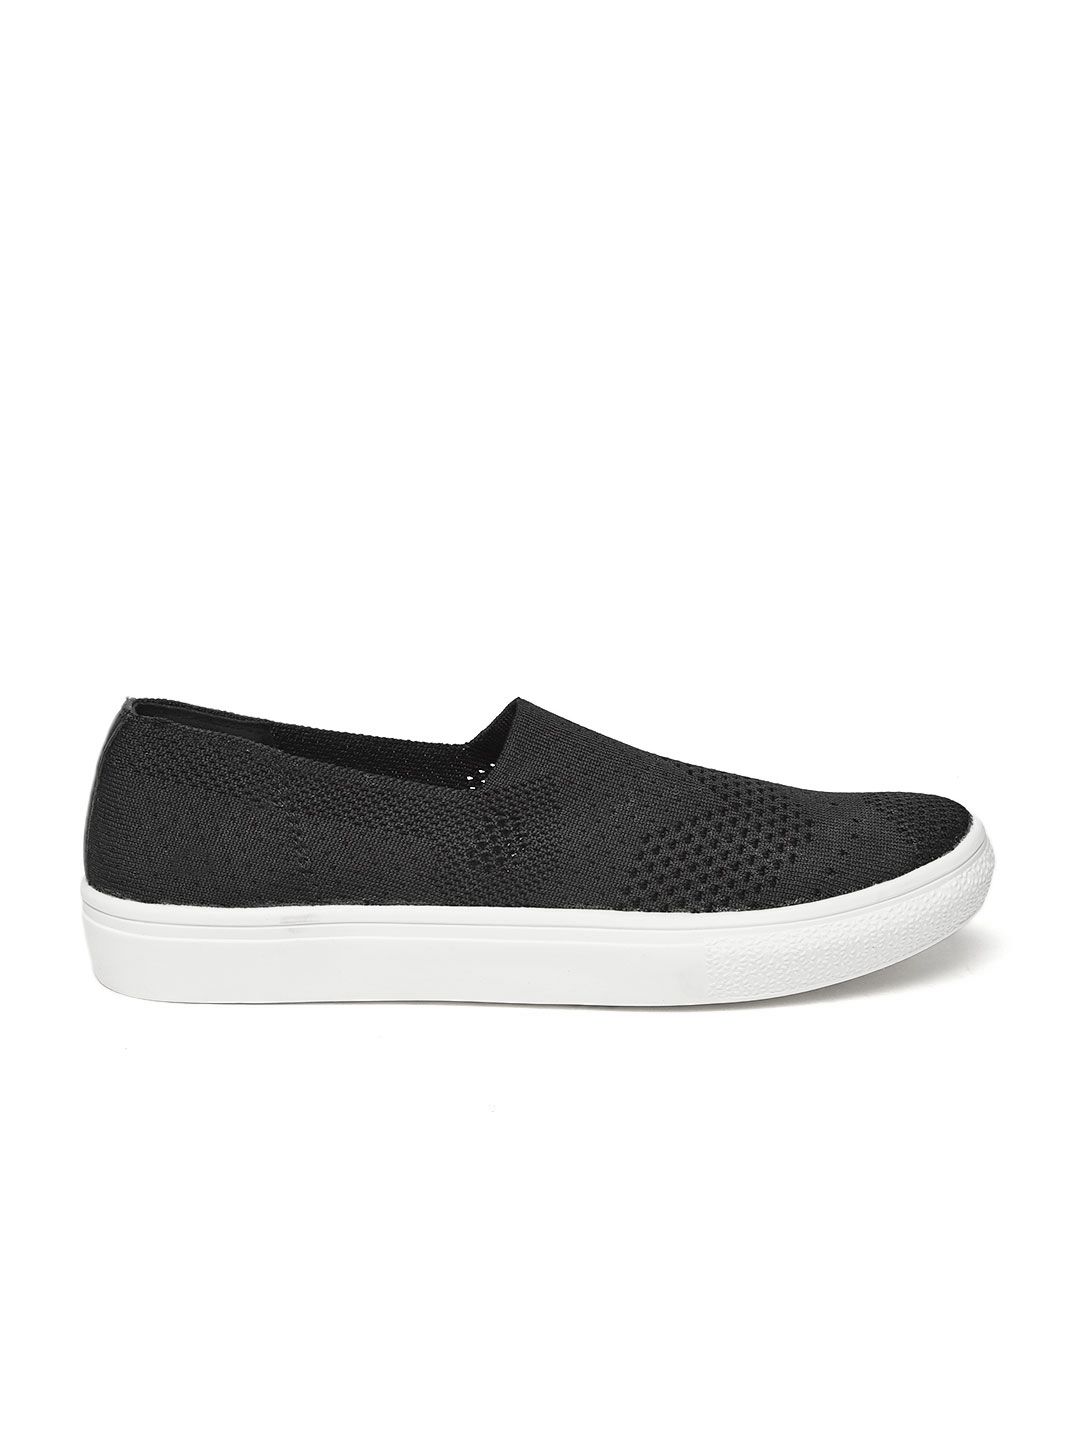 ether Women Black Woven Design Slip-On Sneakers Price in India